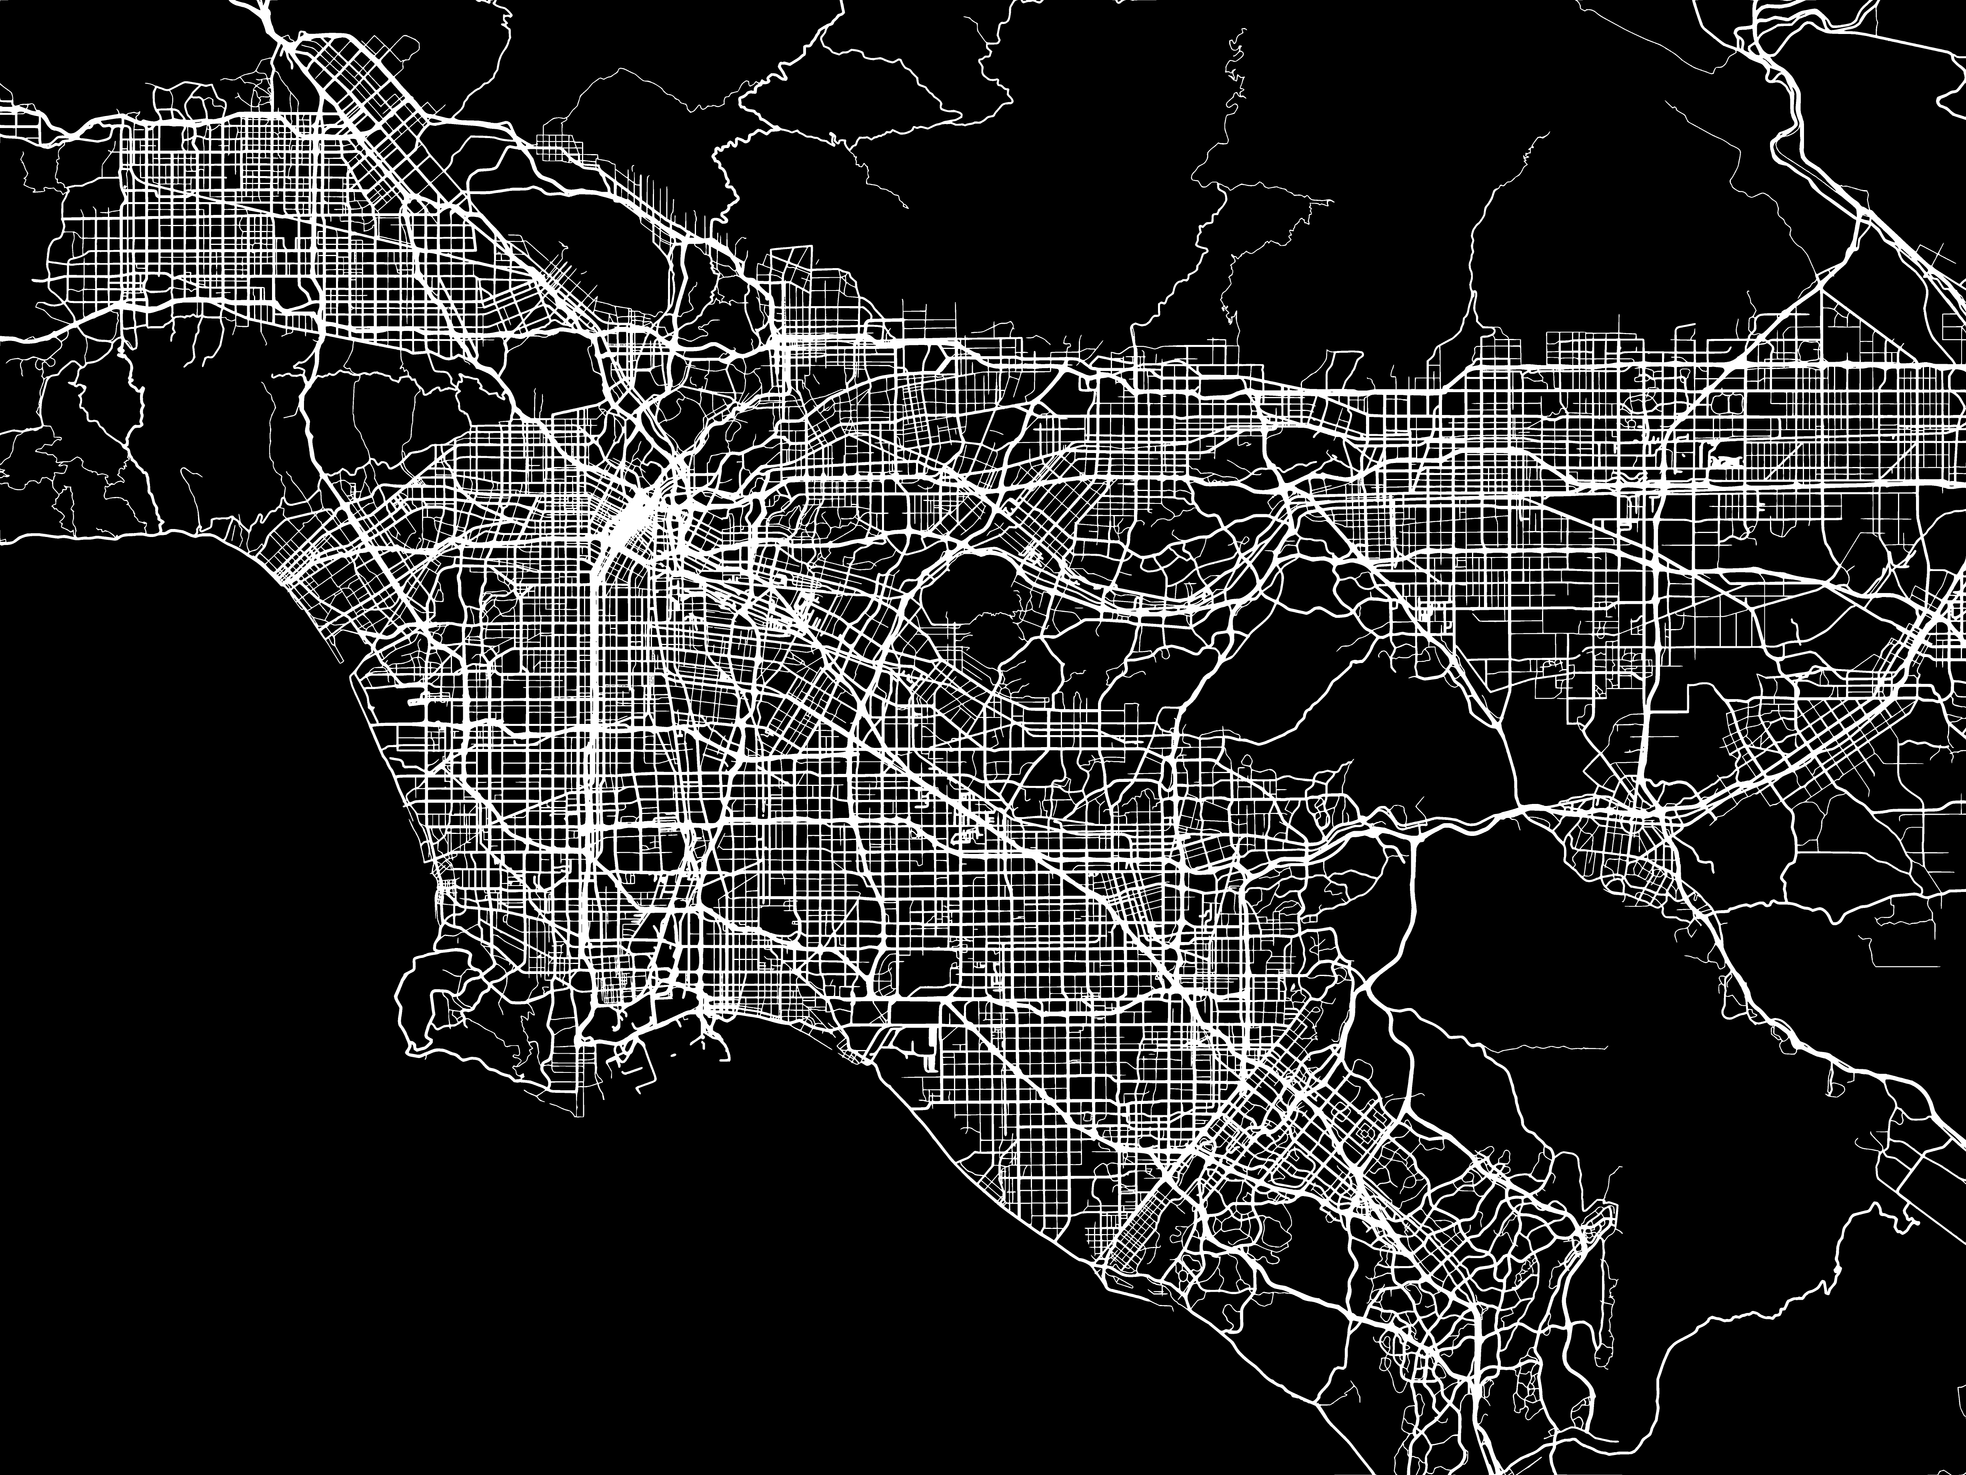 Line art map of Los Angeles serving as the background to the collage of photos of LA-based Canadian composer, Jeff Toyne.